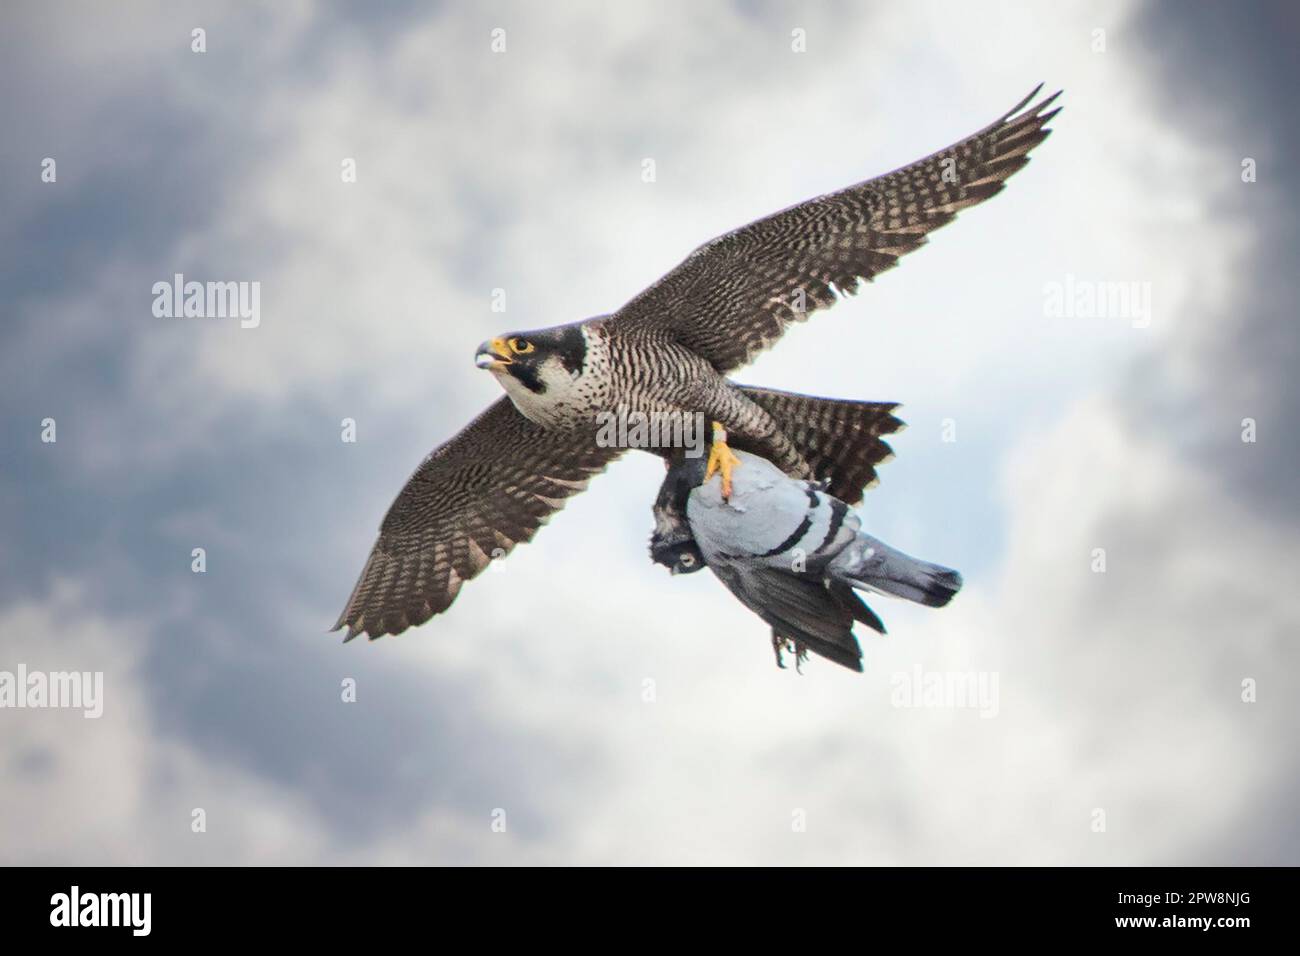 The Netherlands, Amsterdam. Peregrine falcon (Falco peregrinus) with prey (rock pigeon), breeding in nesting box on ABN-AMRO building in business dist Stock Photo